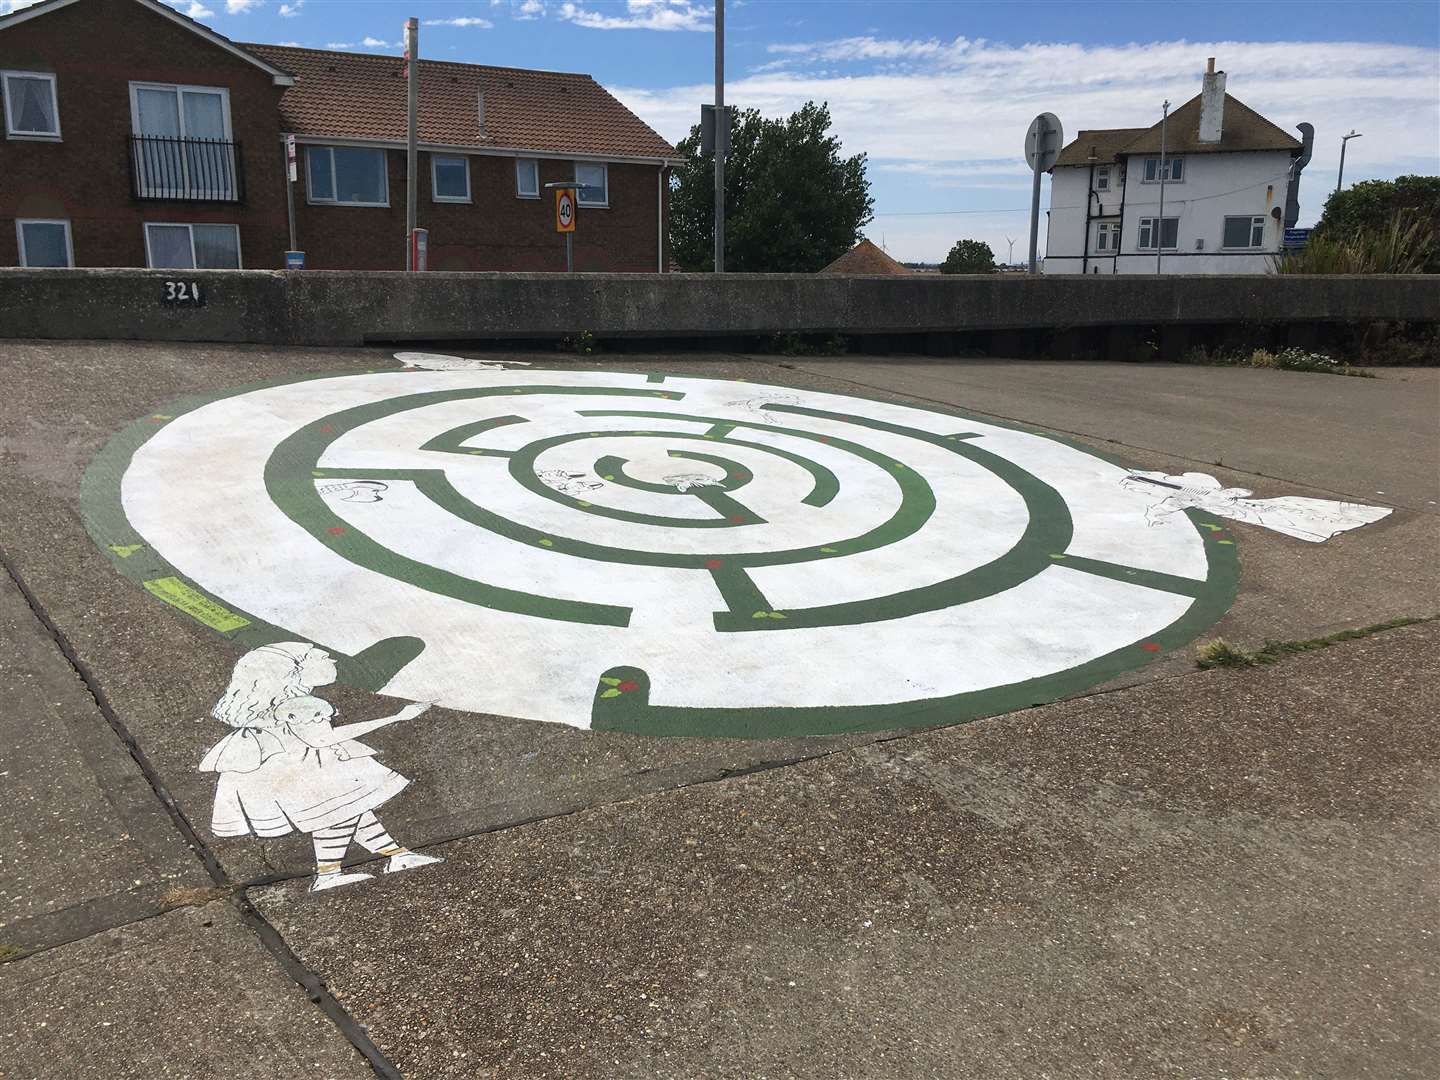 Now you see it: The Alice in Wonderland maze on the promenade at The Leas, Minster